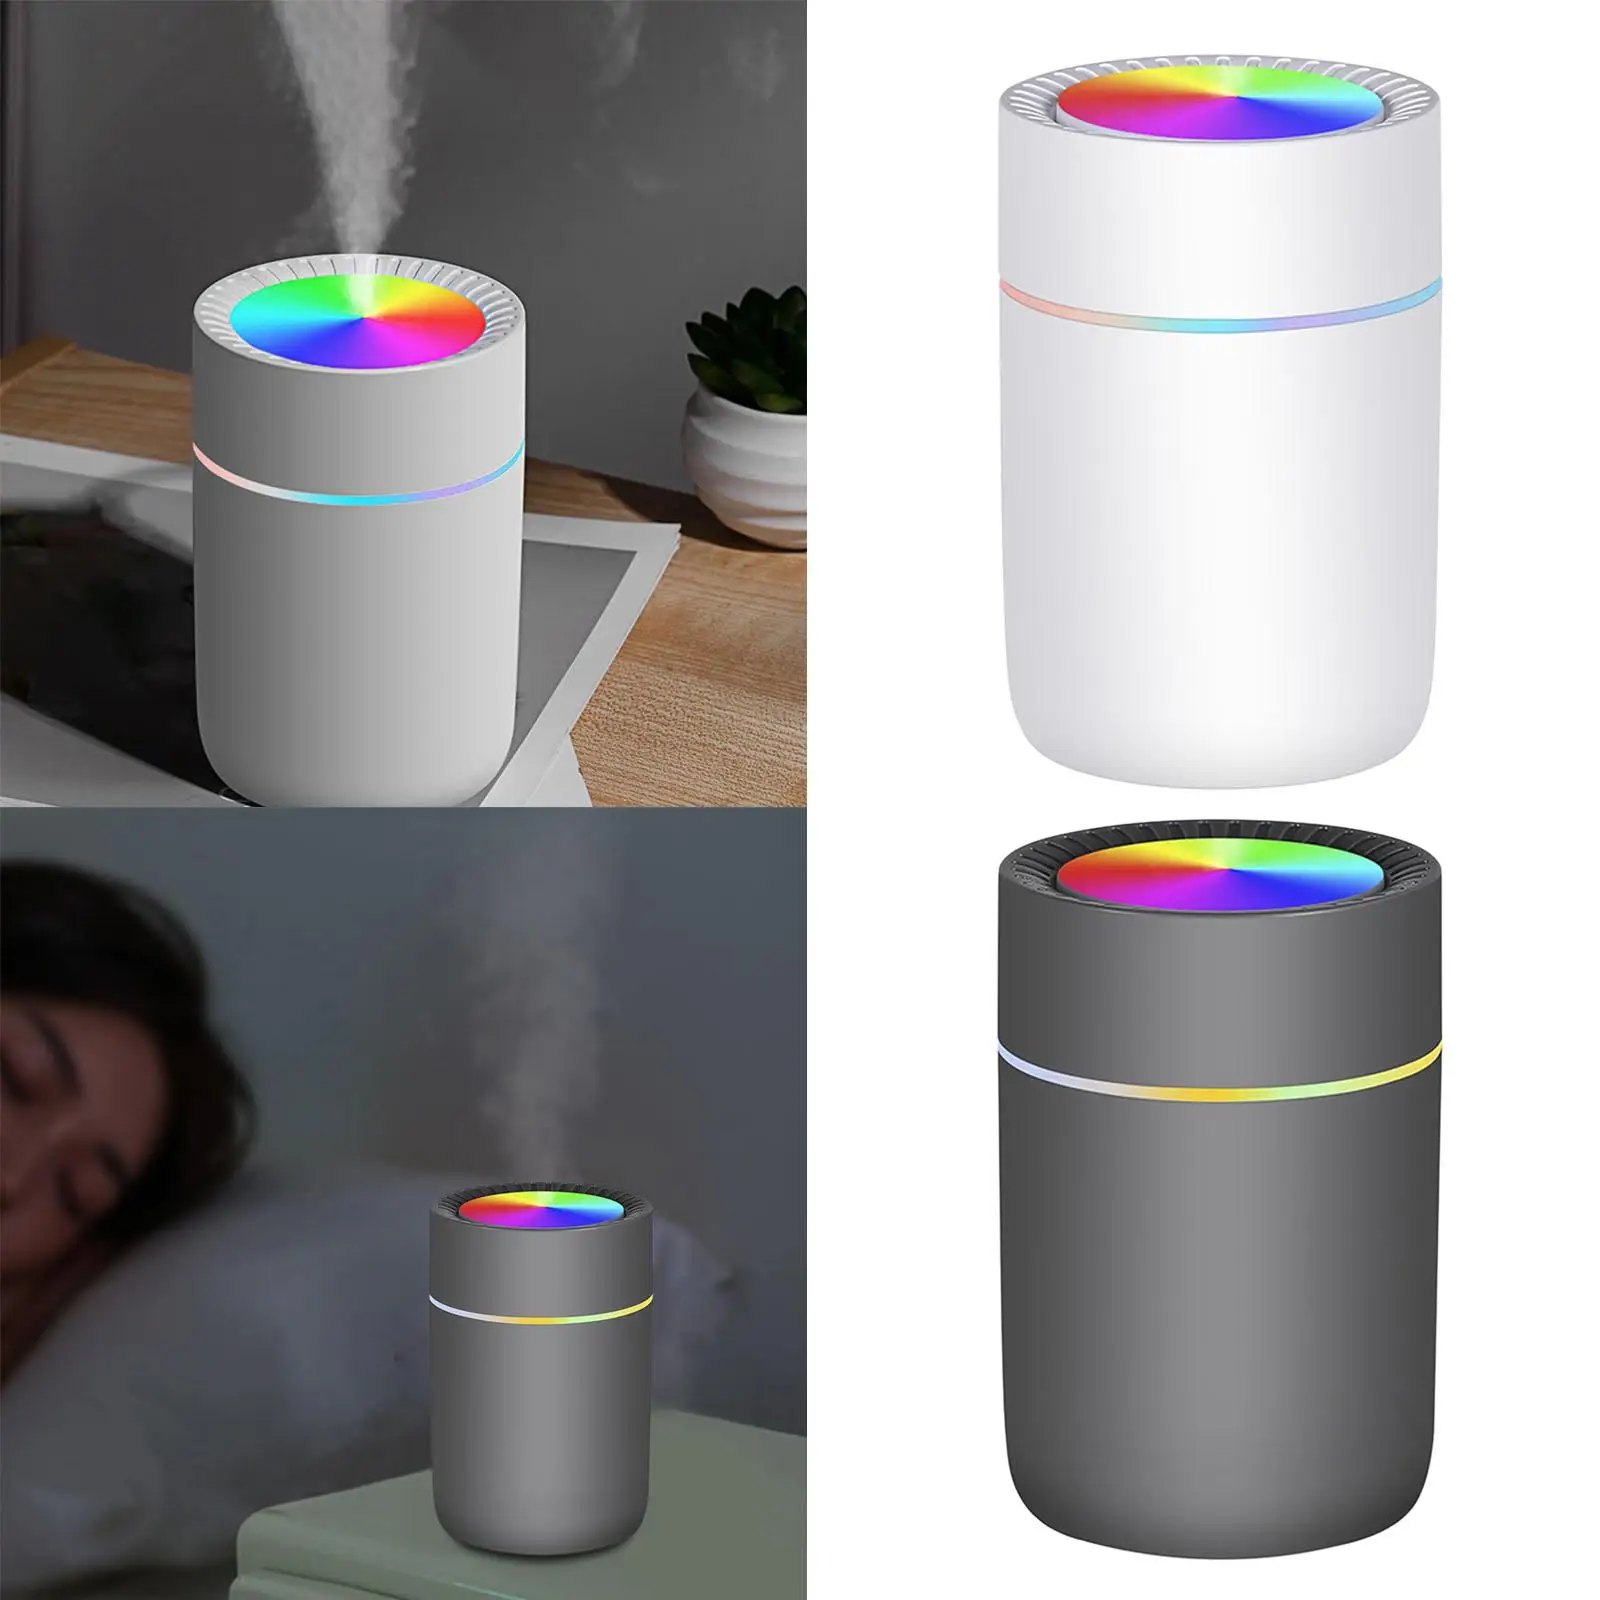 Mist Two Spray Modes with Colorful Light Low Noise Fogger Diffuser 350ml Capacity Air for Desk Office Bedroom